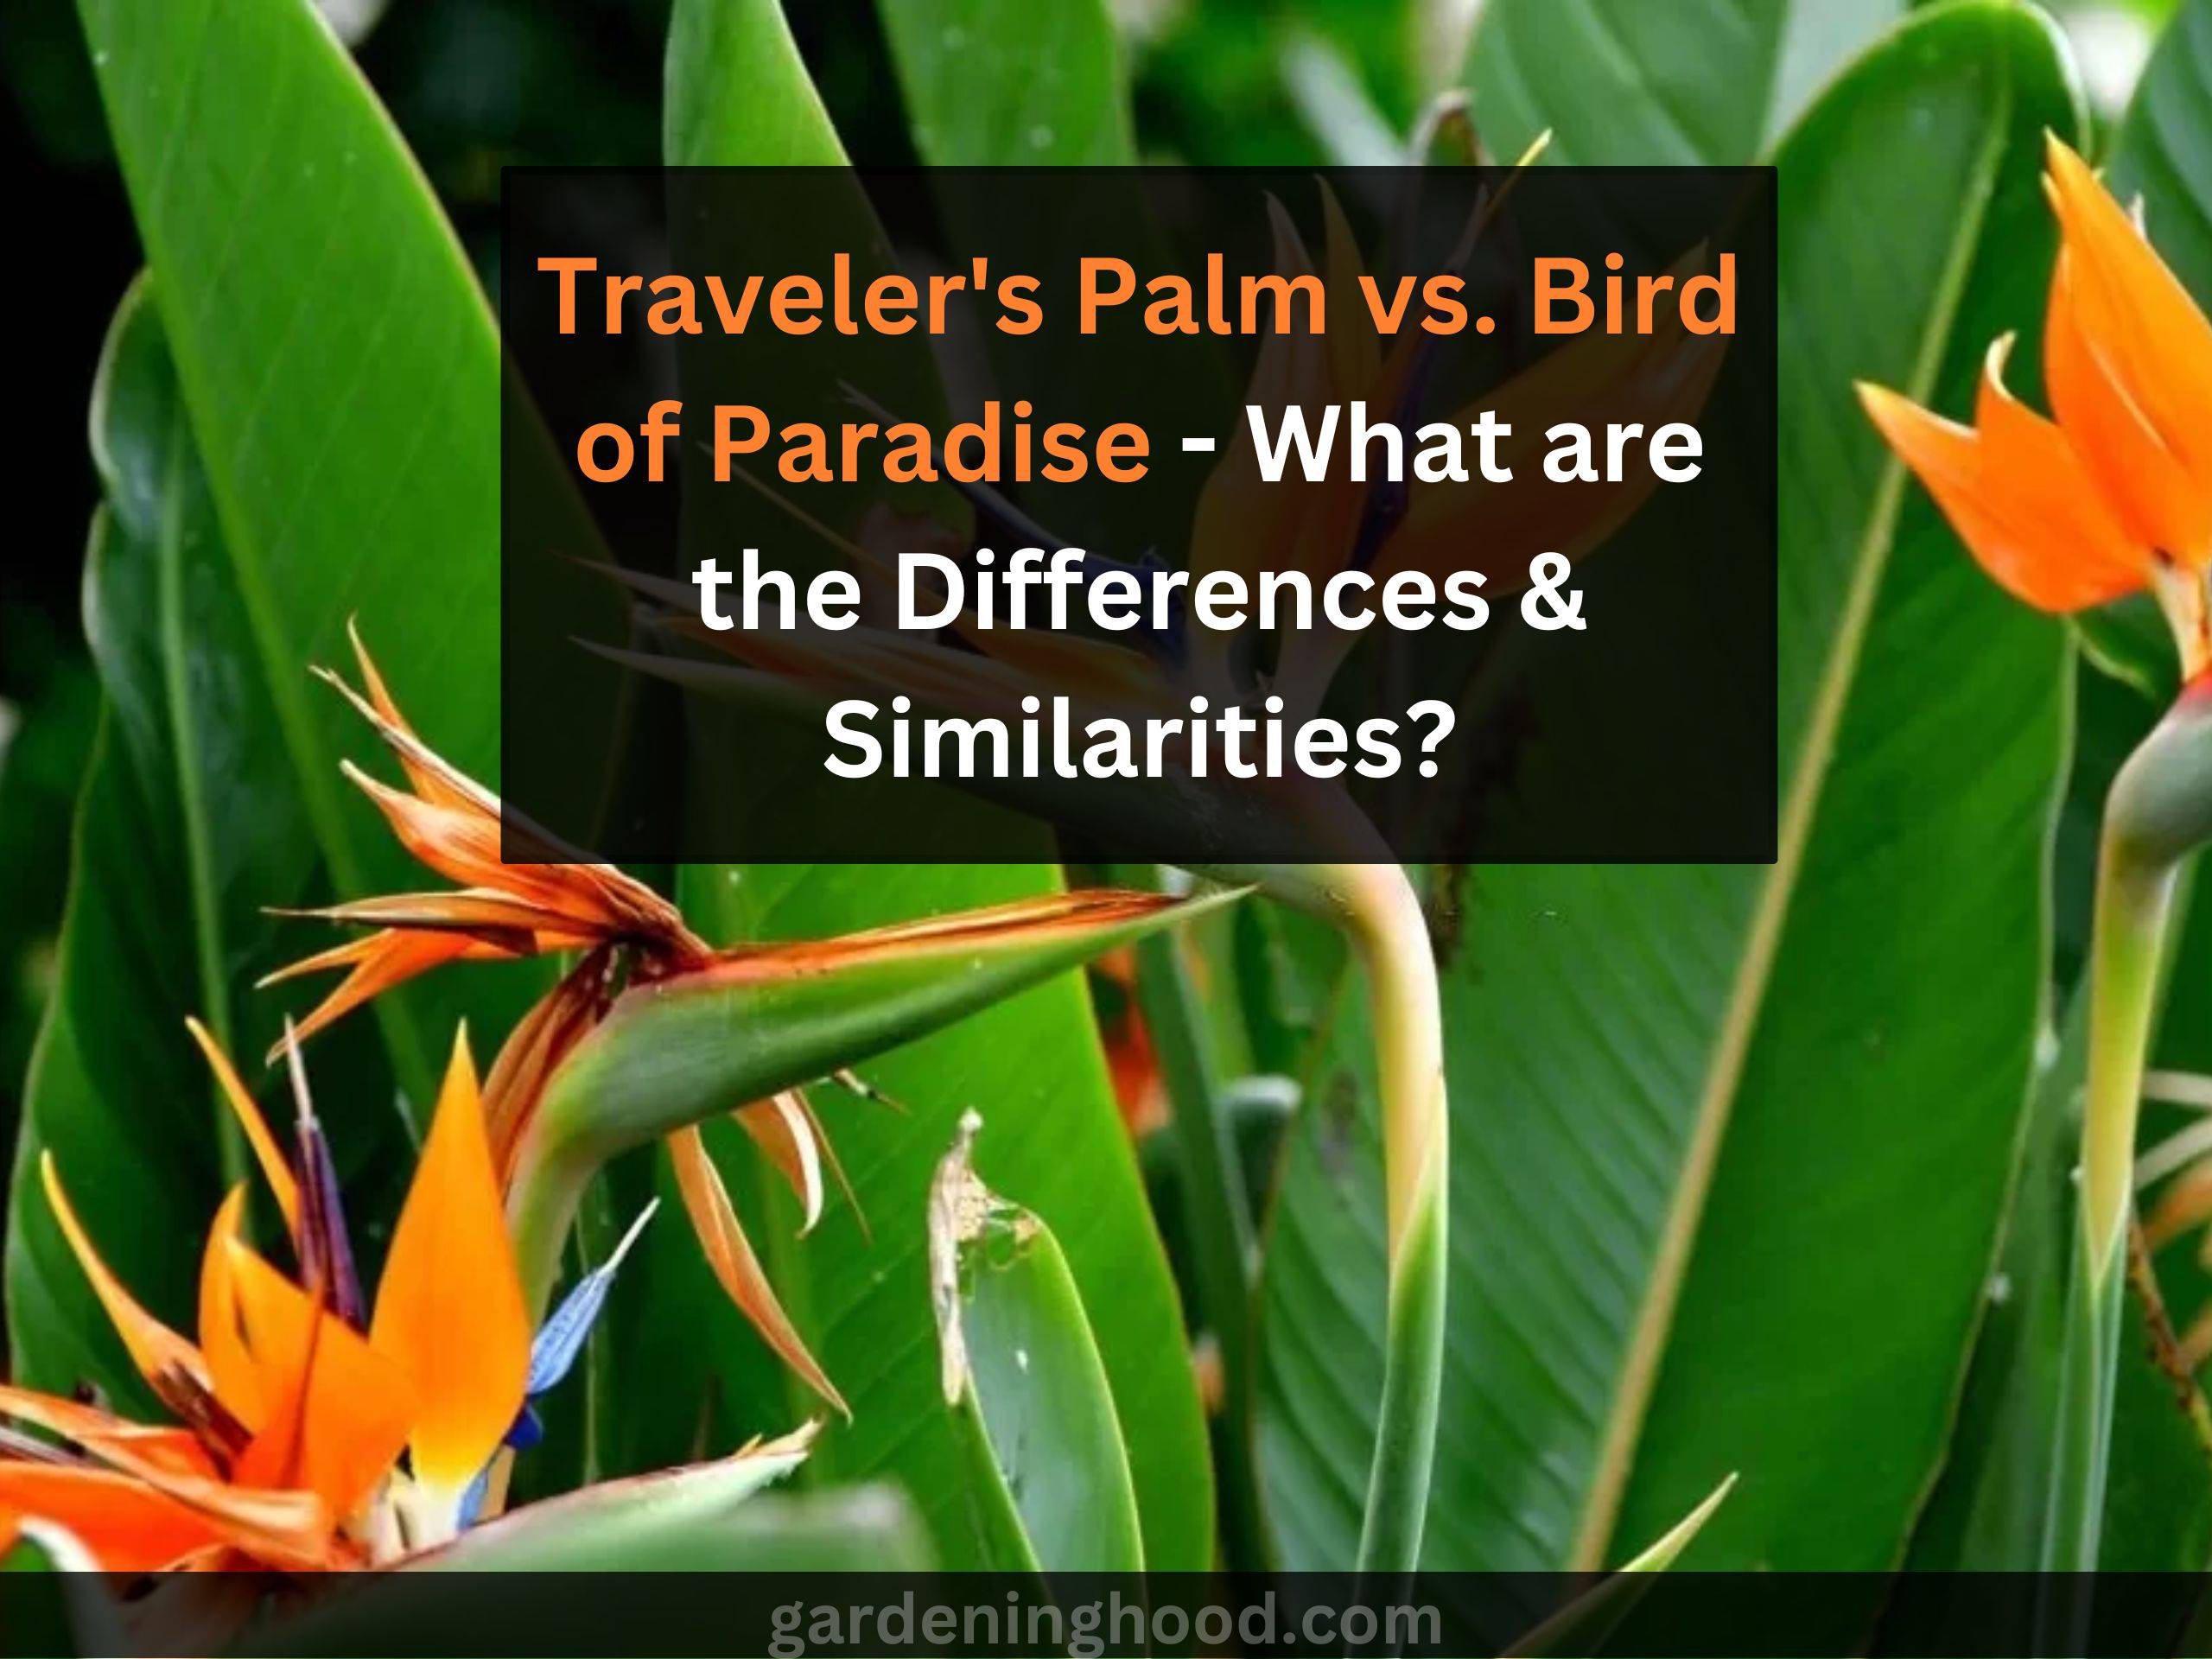 Traveler's Palm vs. Bird of Paradise - What are the Differences & Similarities?